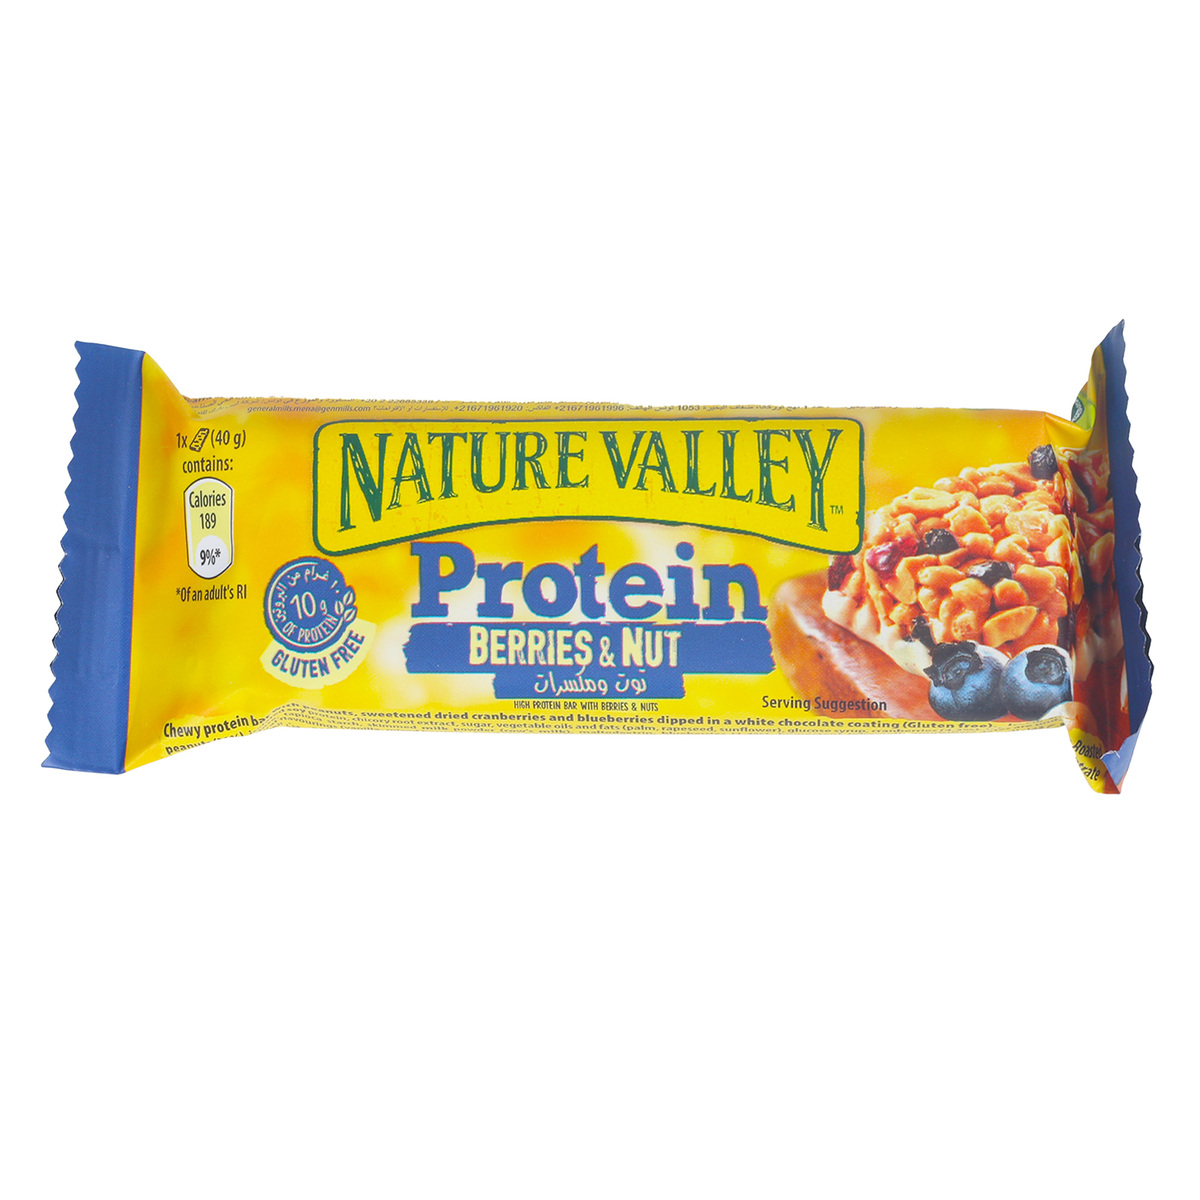 Nature Valley Berries & Nuts Protein Chewy Bars 4 x 40 g